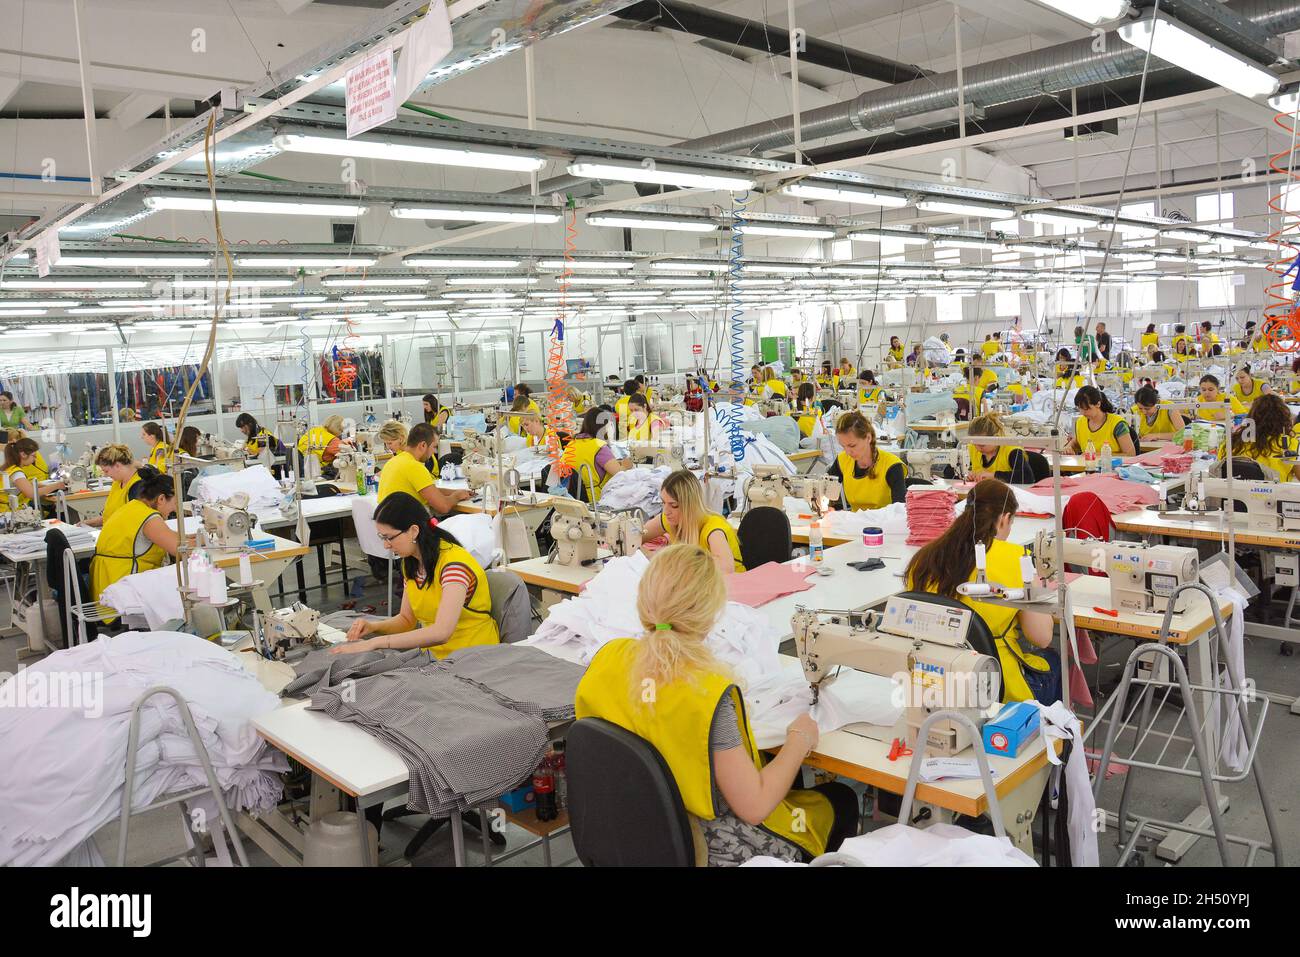 Large textile factory with valuable workers Stock Photo